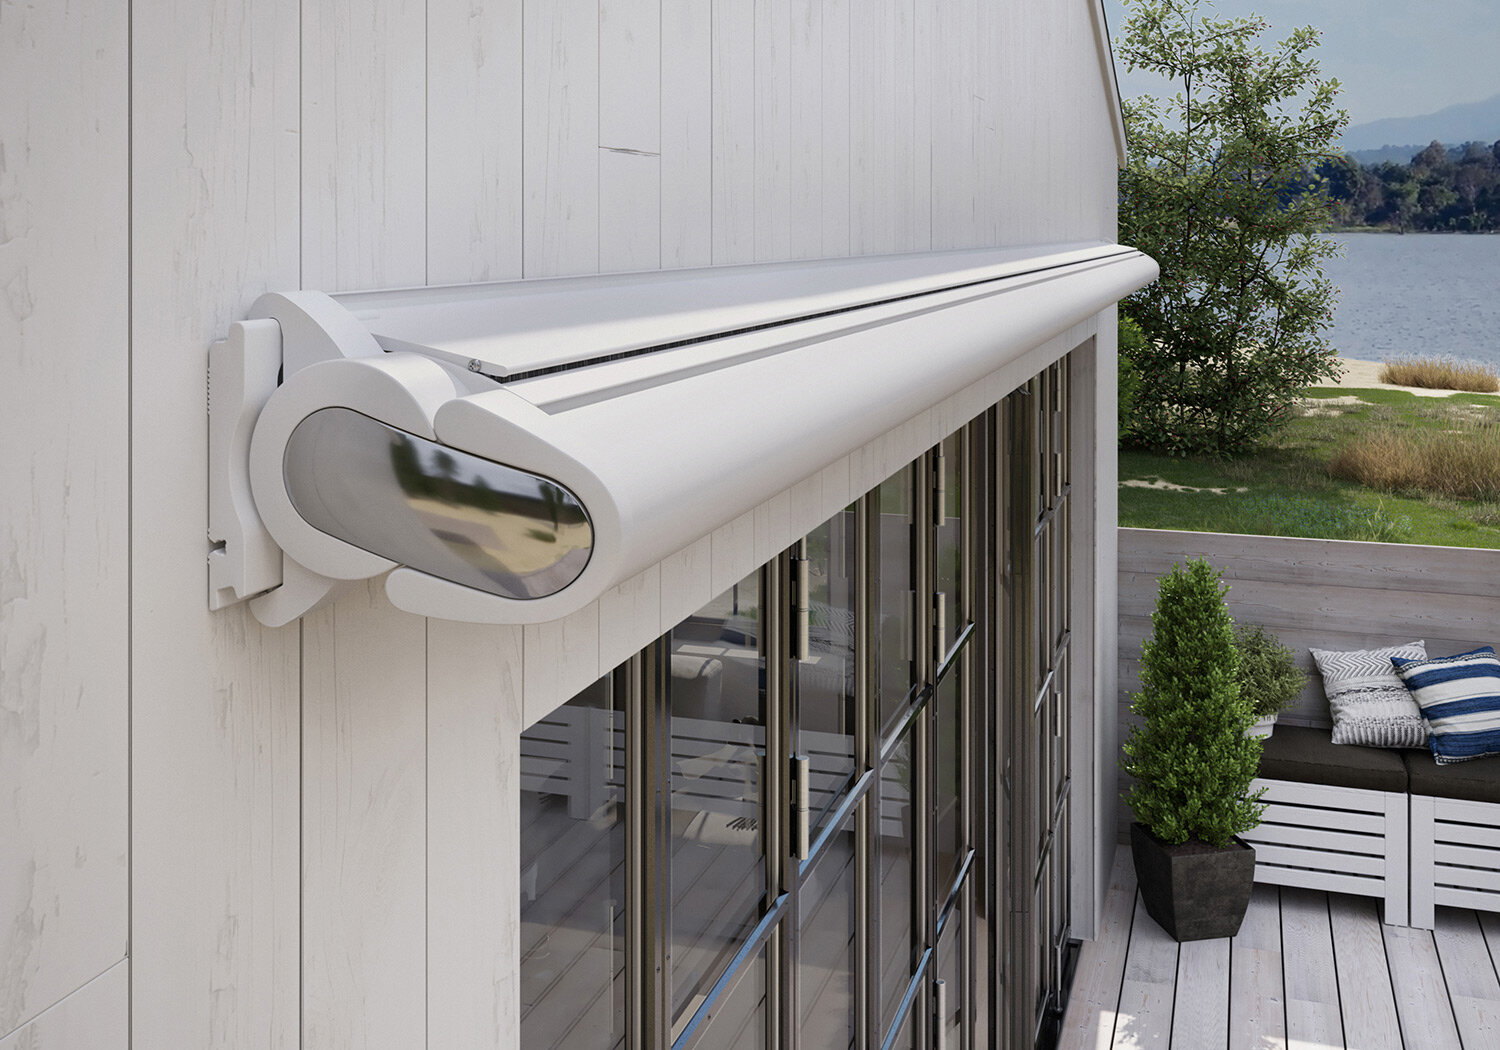 Motorised Awnings London and UK. We supply and install a wide range of electric awnings for patios and balconies, as well as pergolas, across the UK from leading manufacturers such as Markilux. 